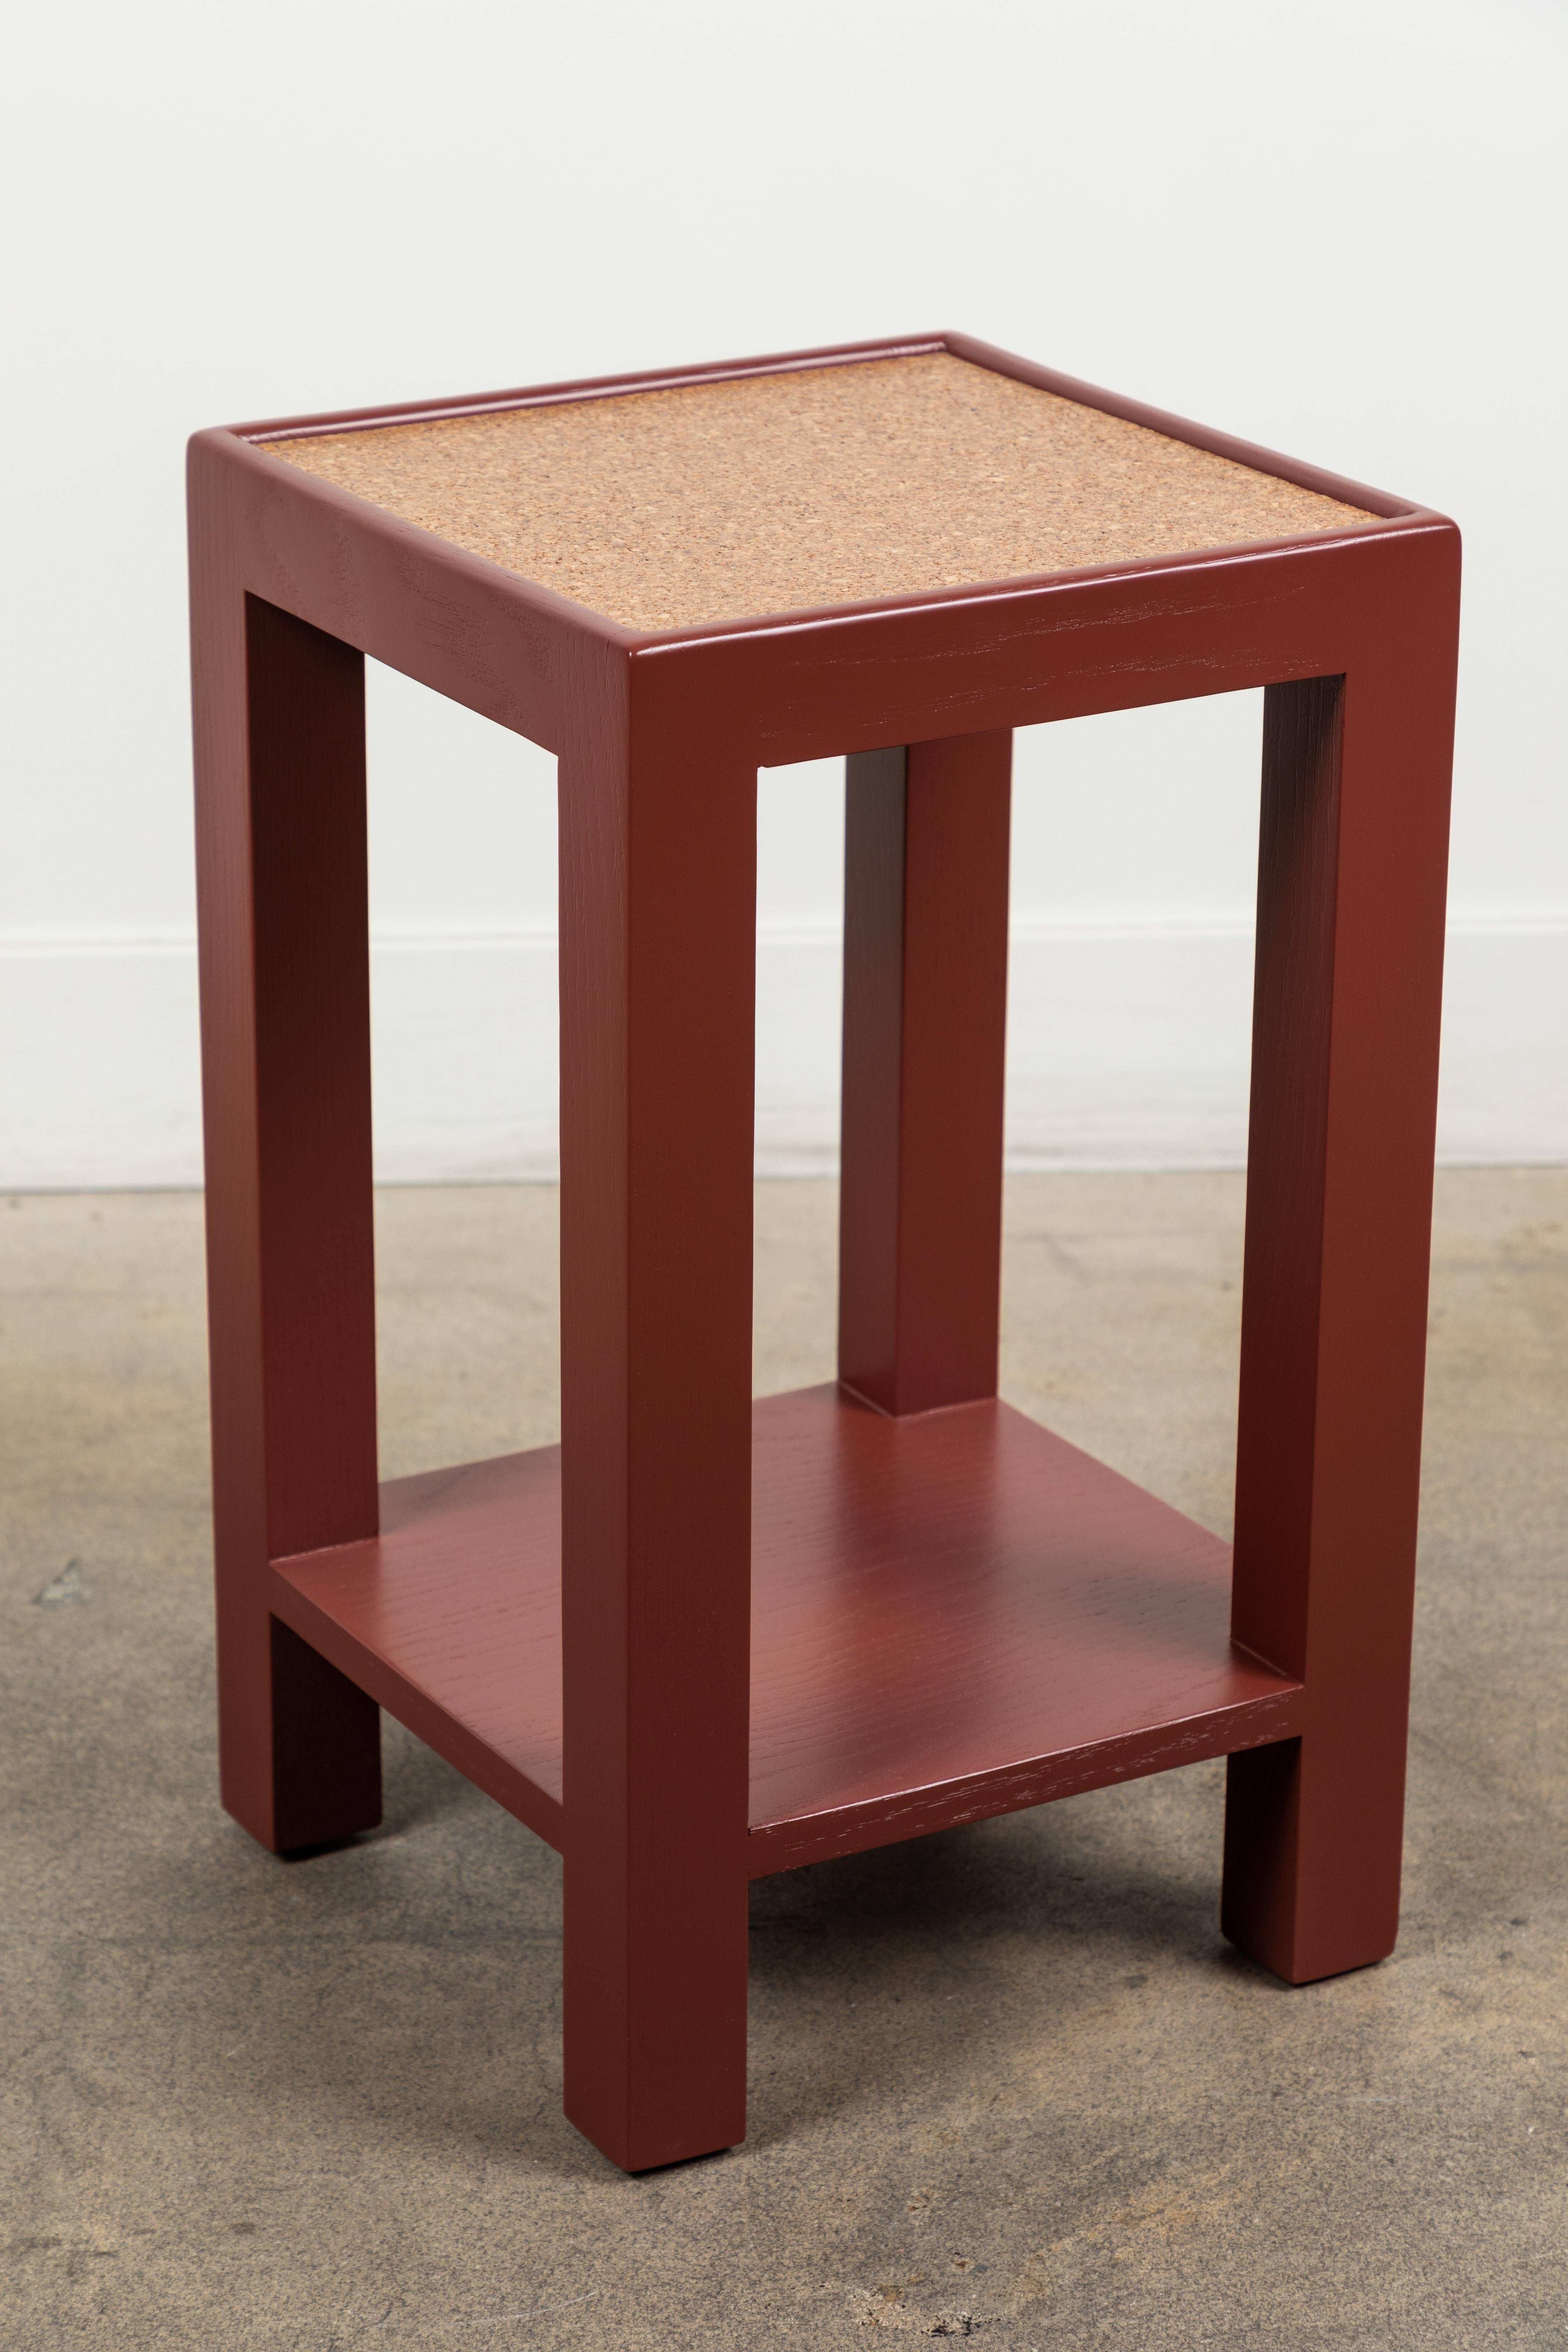 narrow side tables